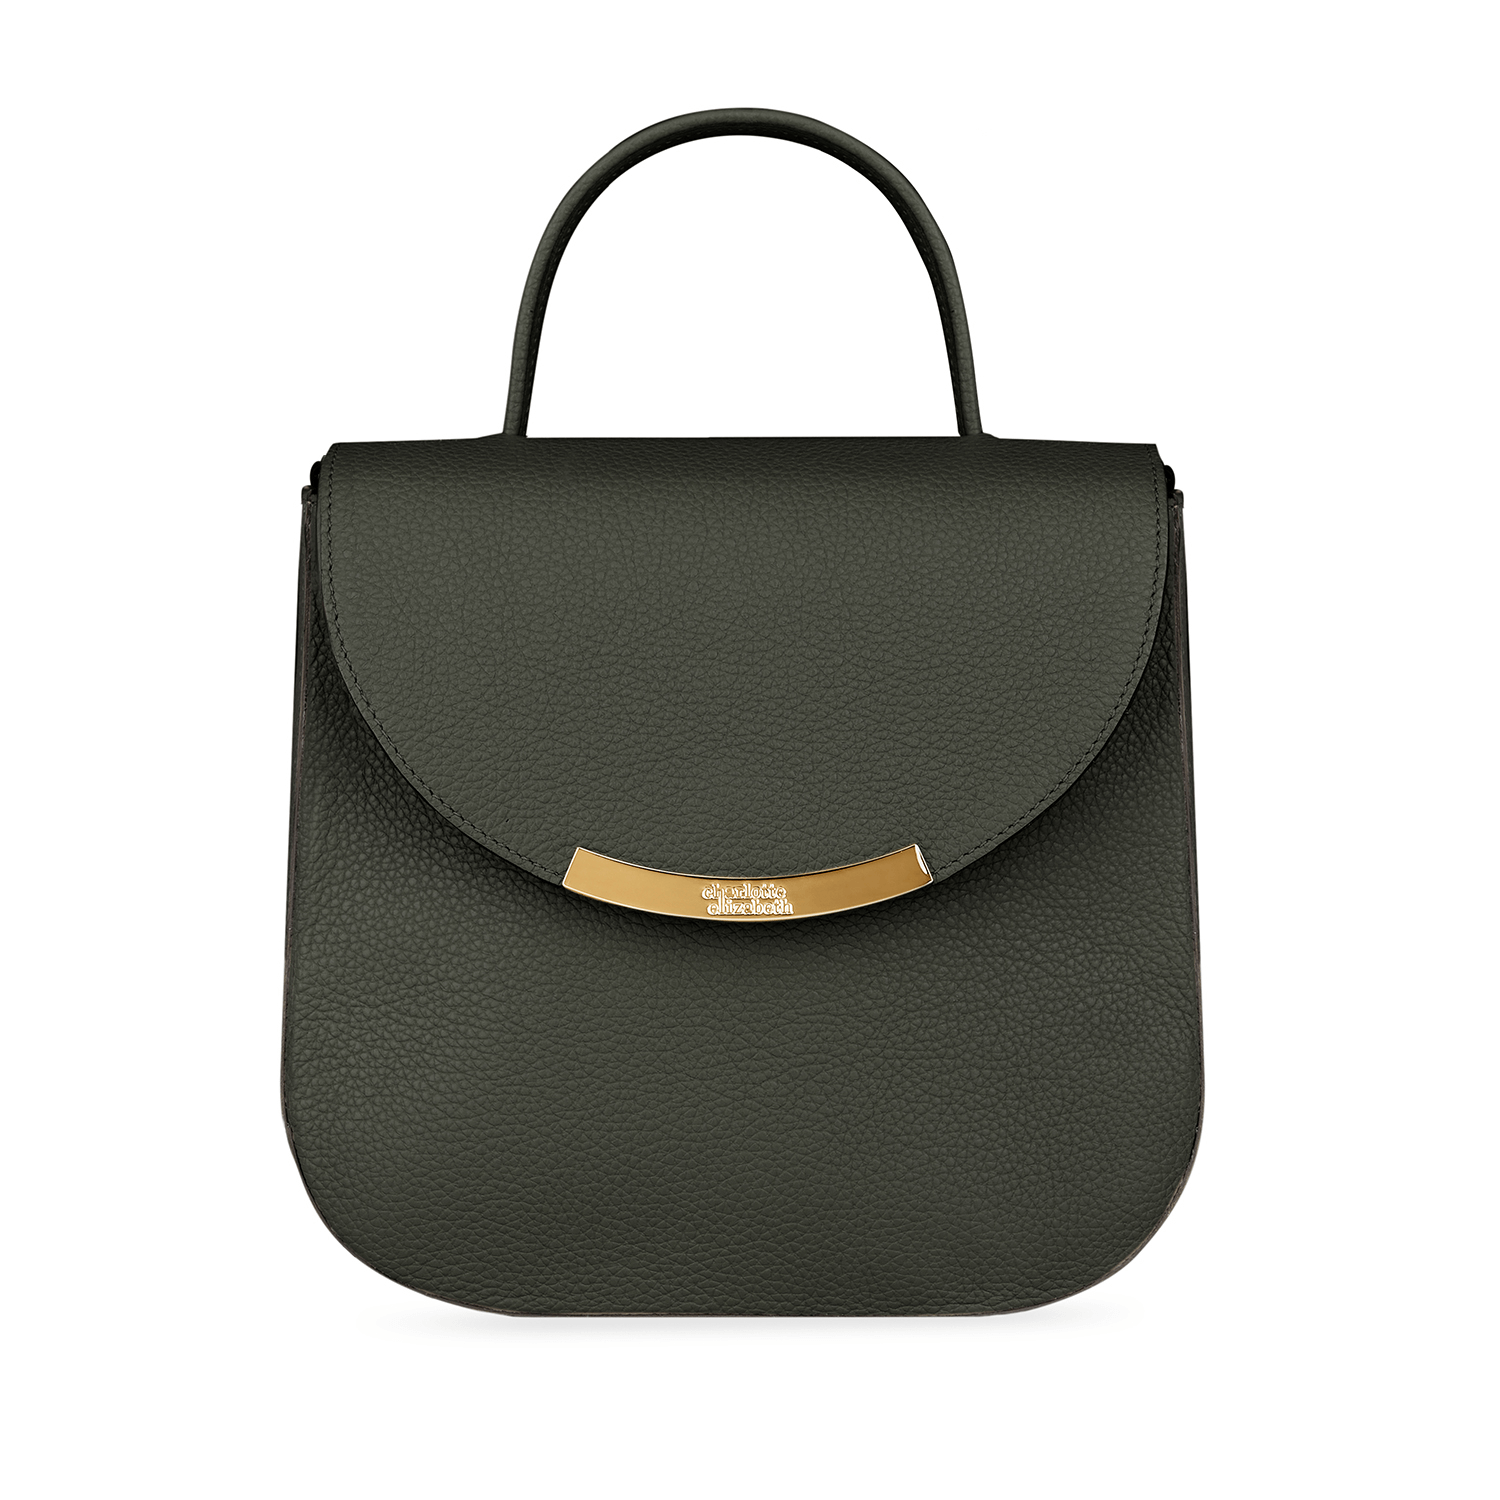 Bloomsbury top handle handbag in forest green with gold hardware